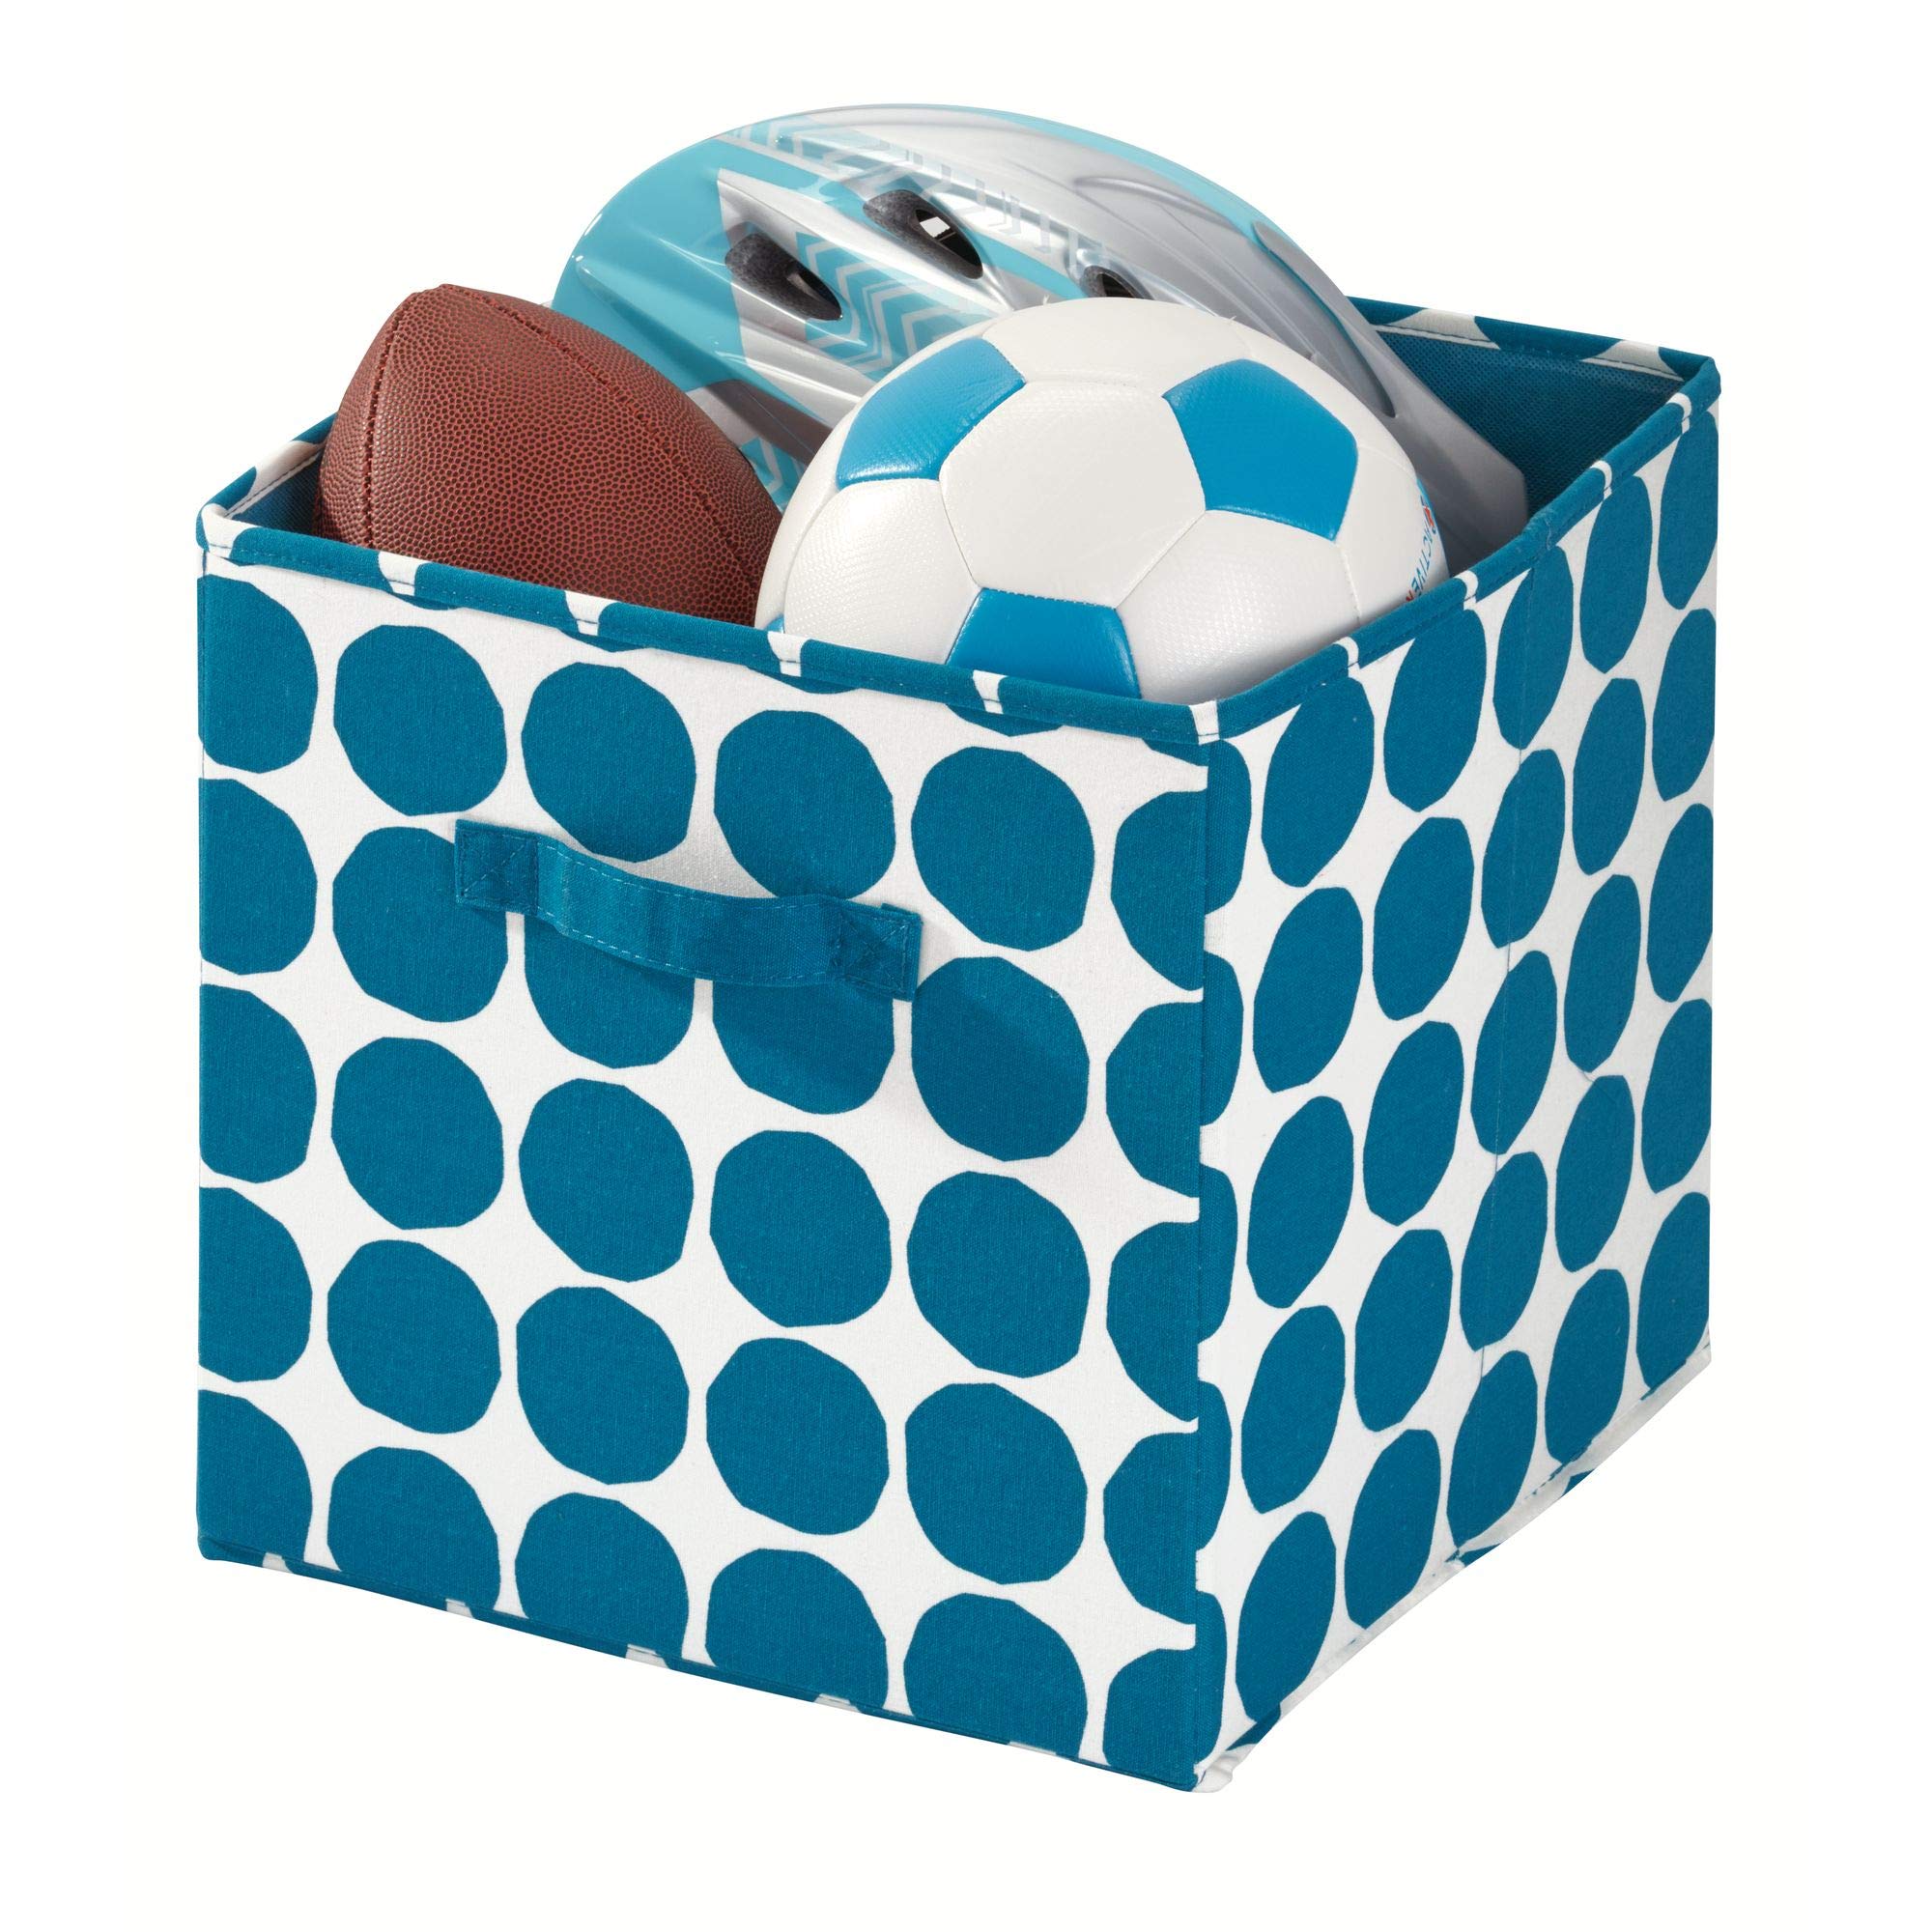 iDesign Dot Fabric Storage Cube Bin, Medium Basket Container with Dual Side Handles for Closet, Bedroom, Toys, Nursery - Blue